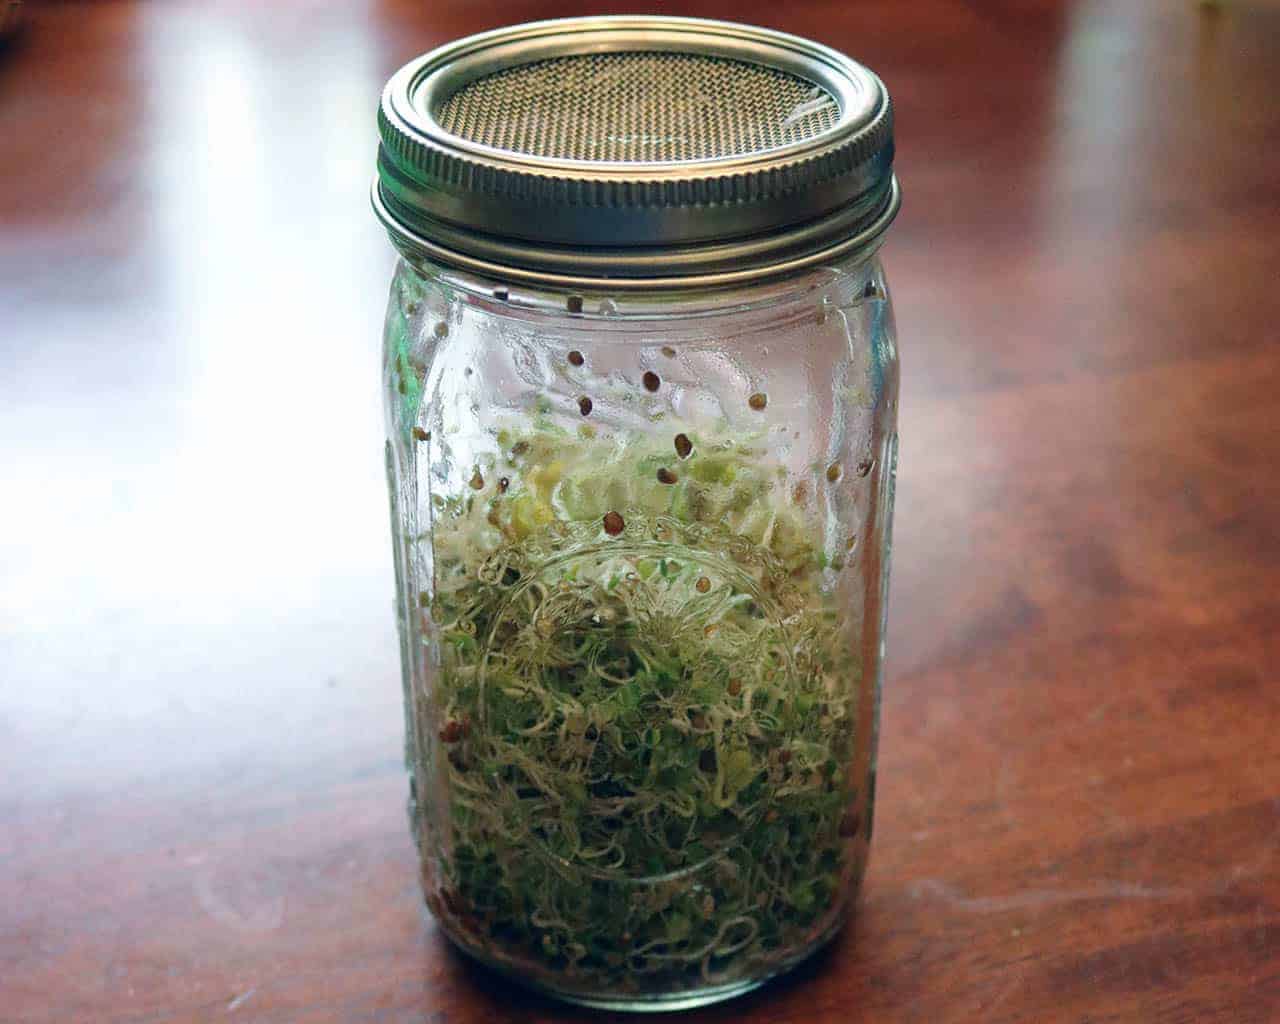 stainless-steel-mesh-sprouting-lid-band-growing-sprouts-wide-mouth-quart-mason-jar